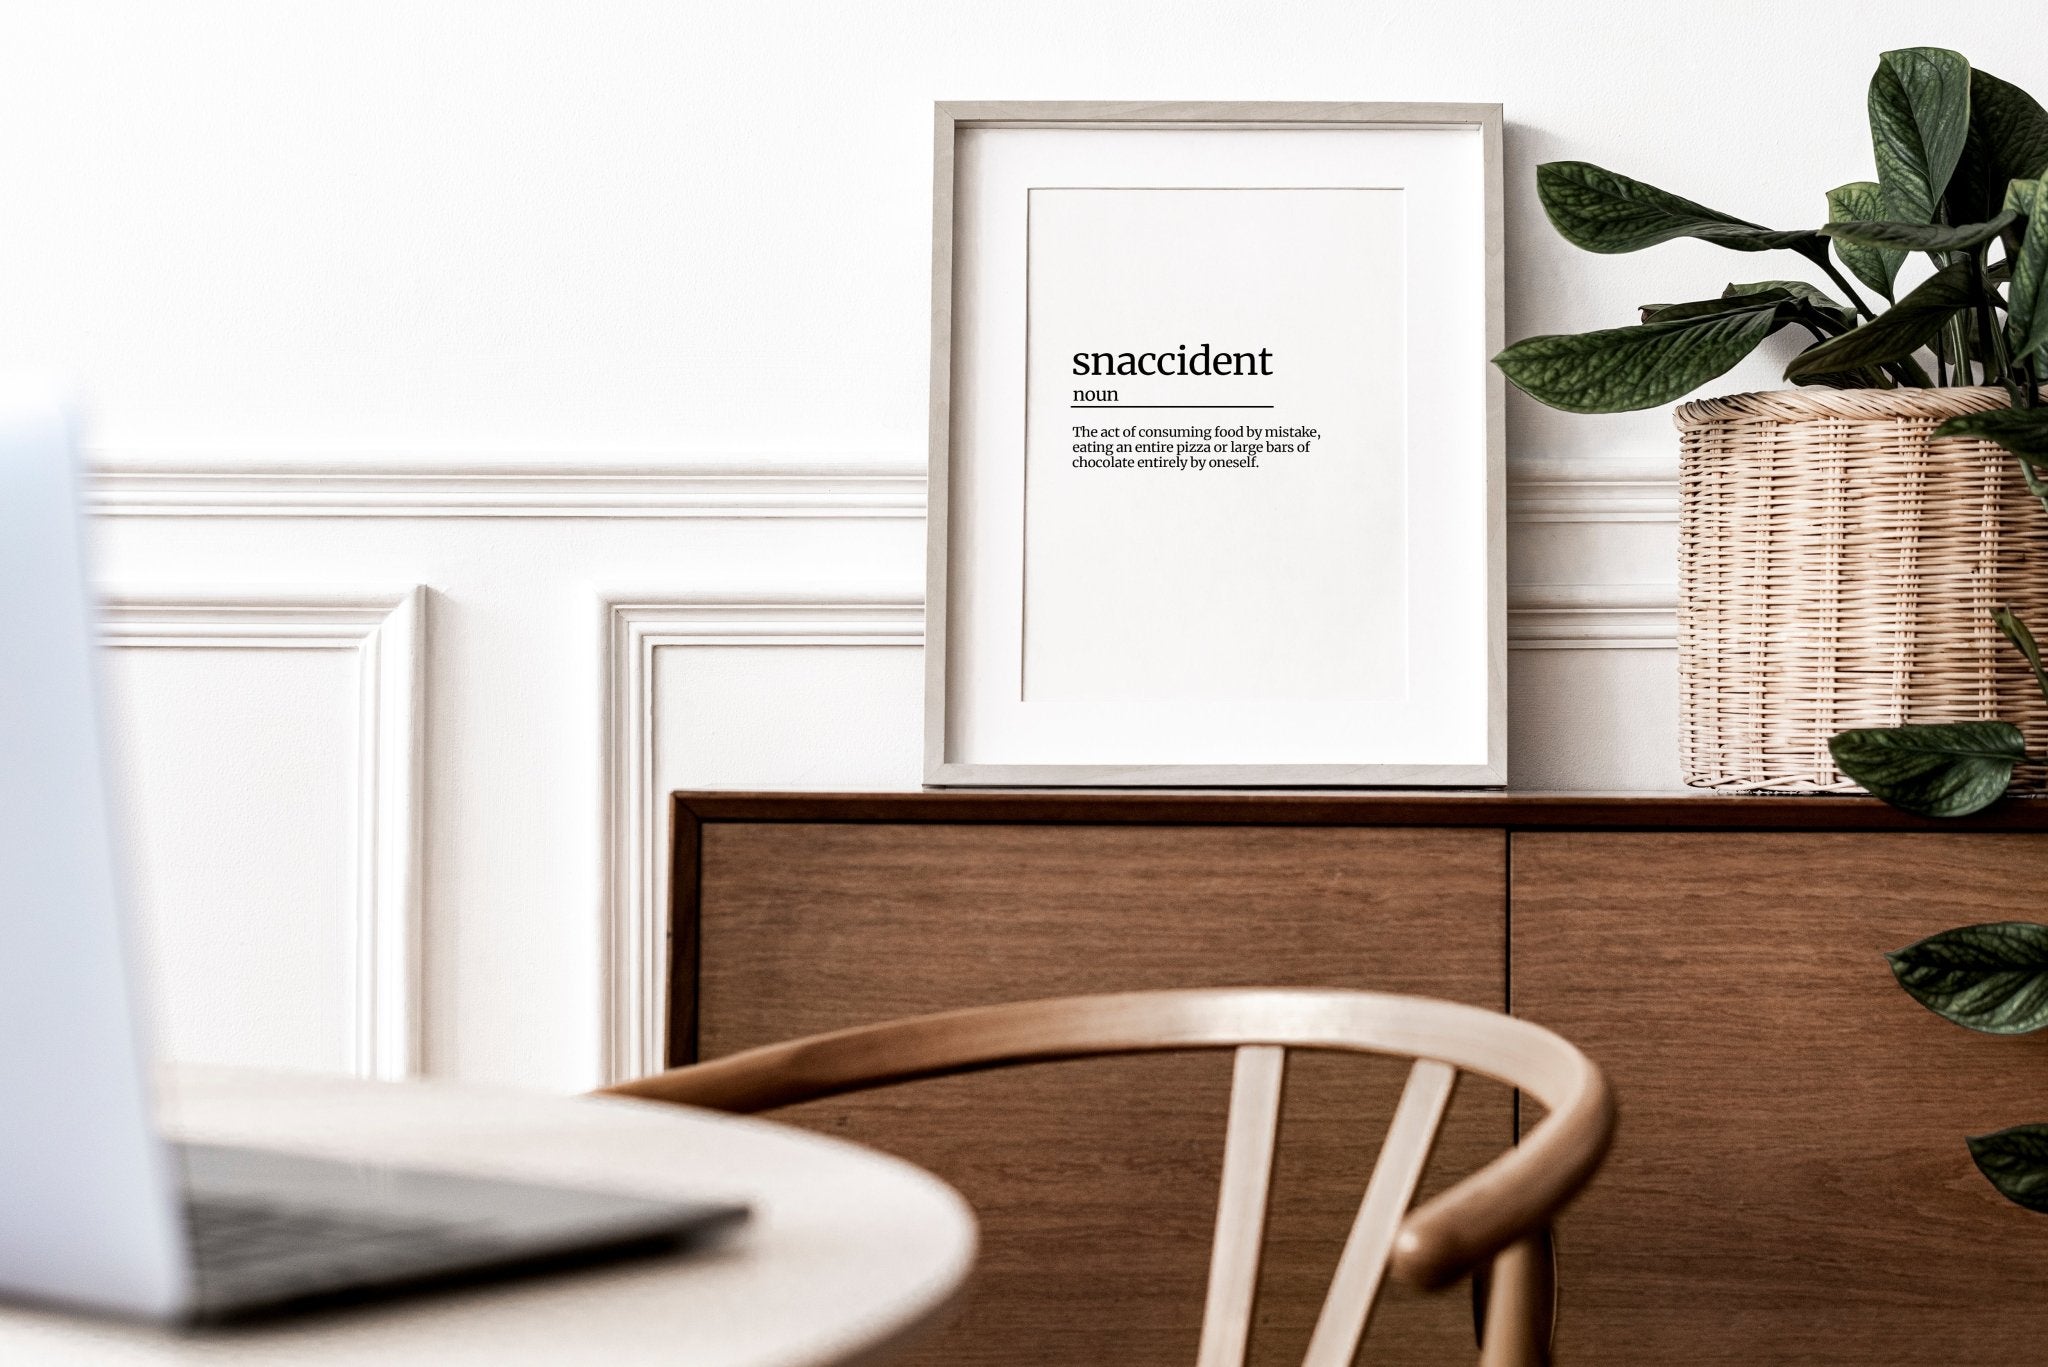 Snaccident Definition Poster Print